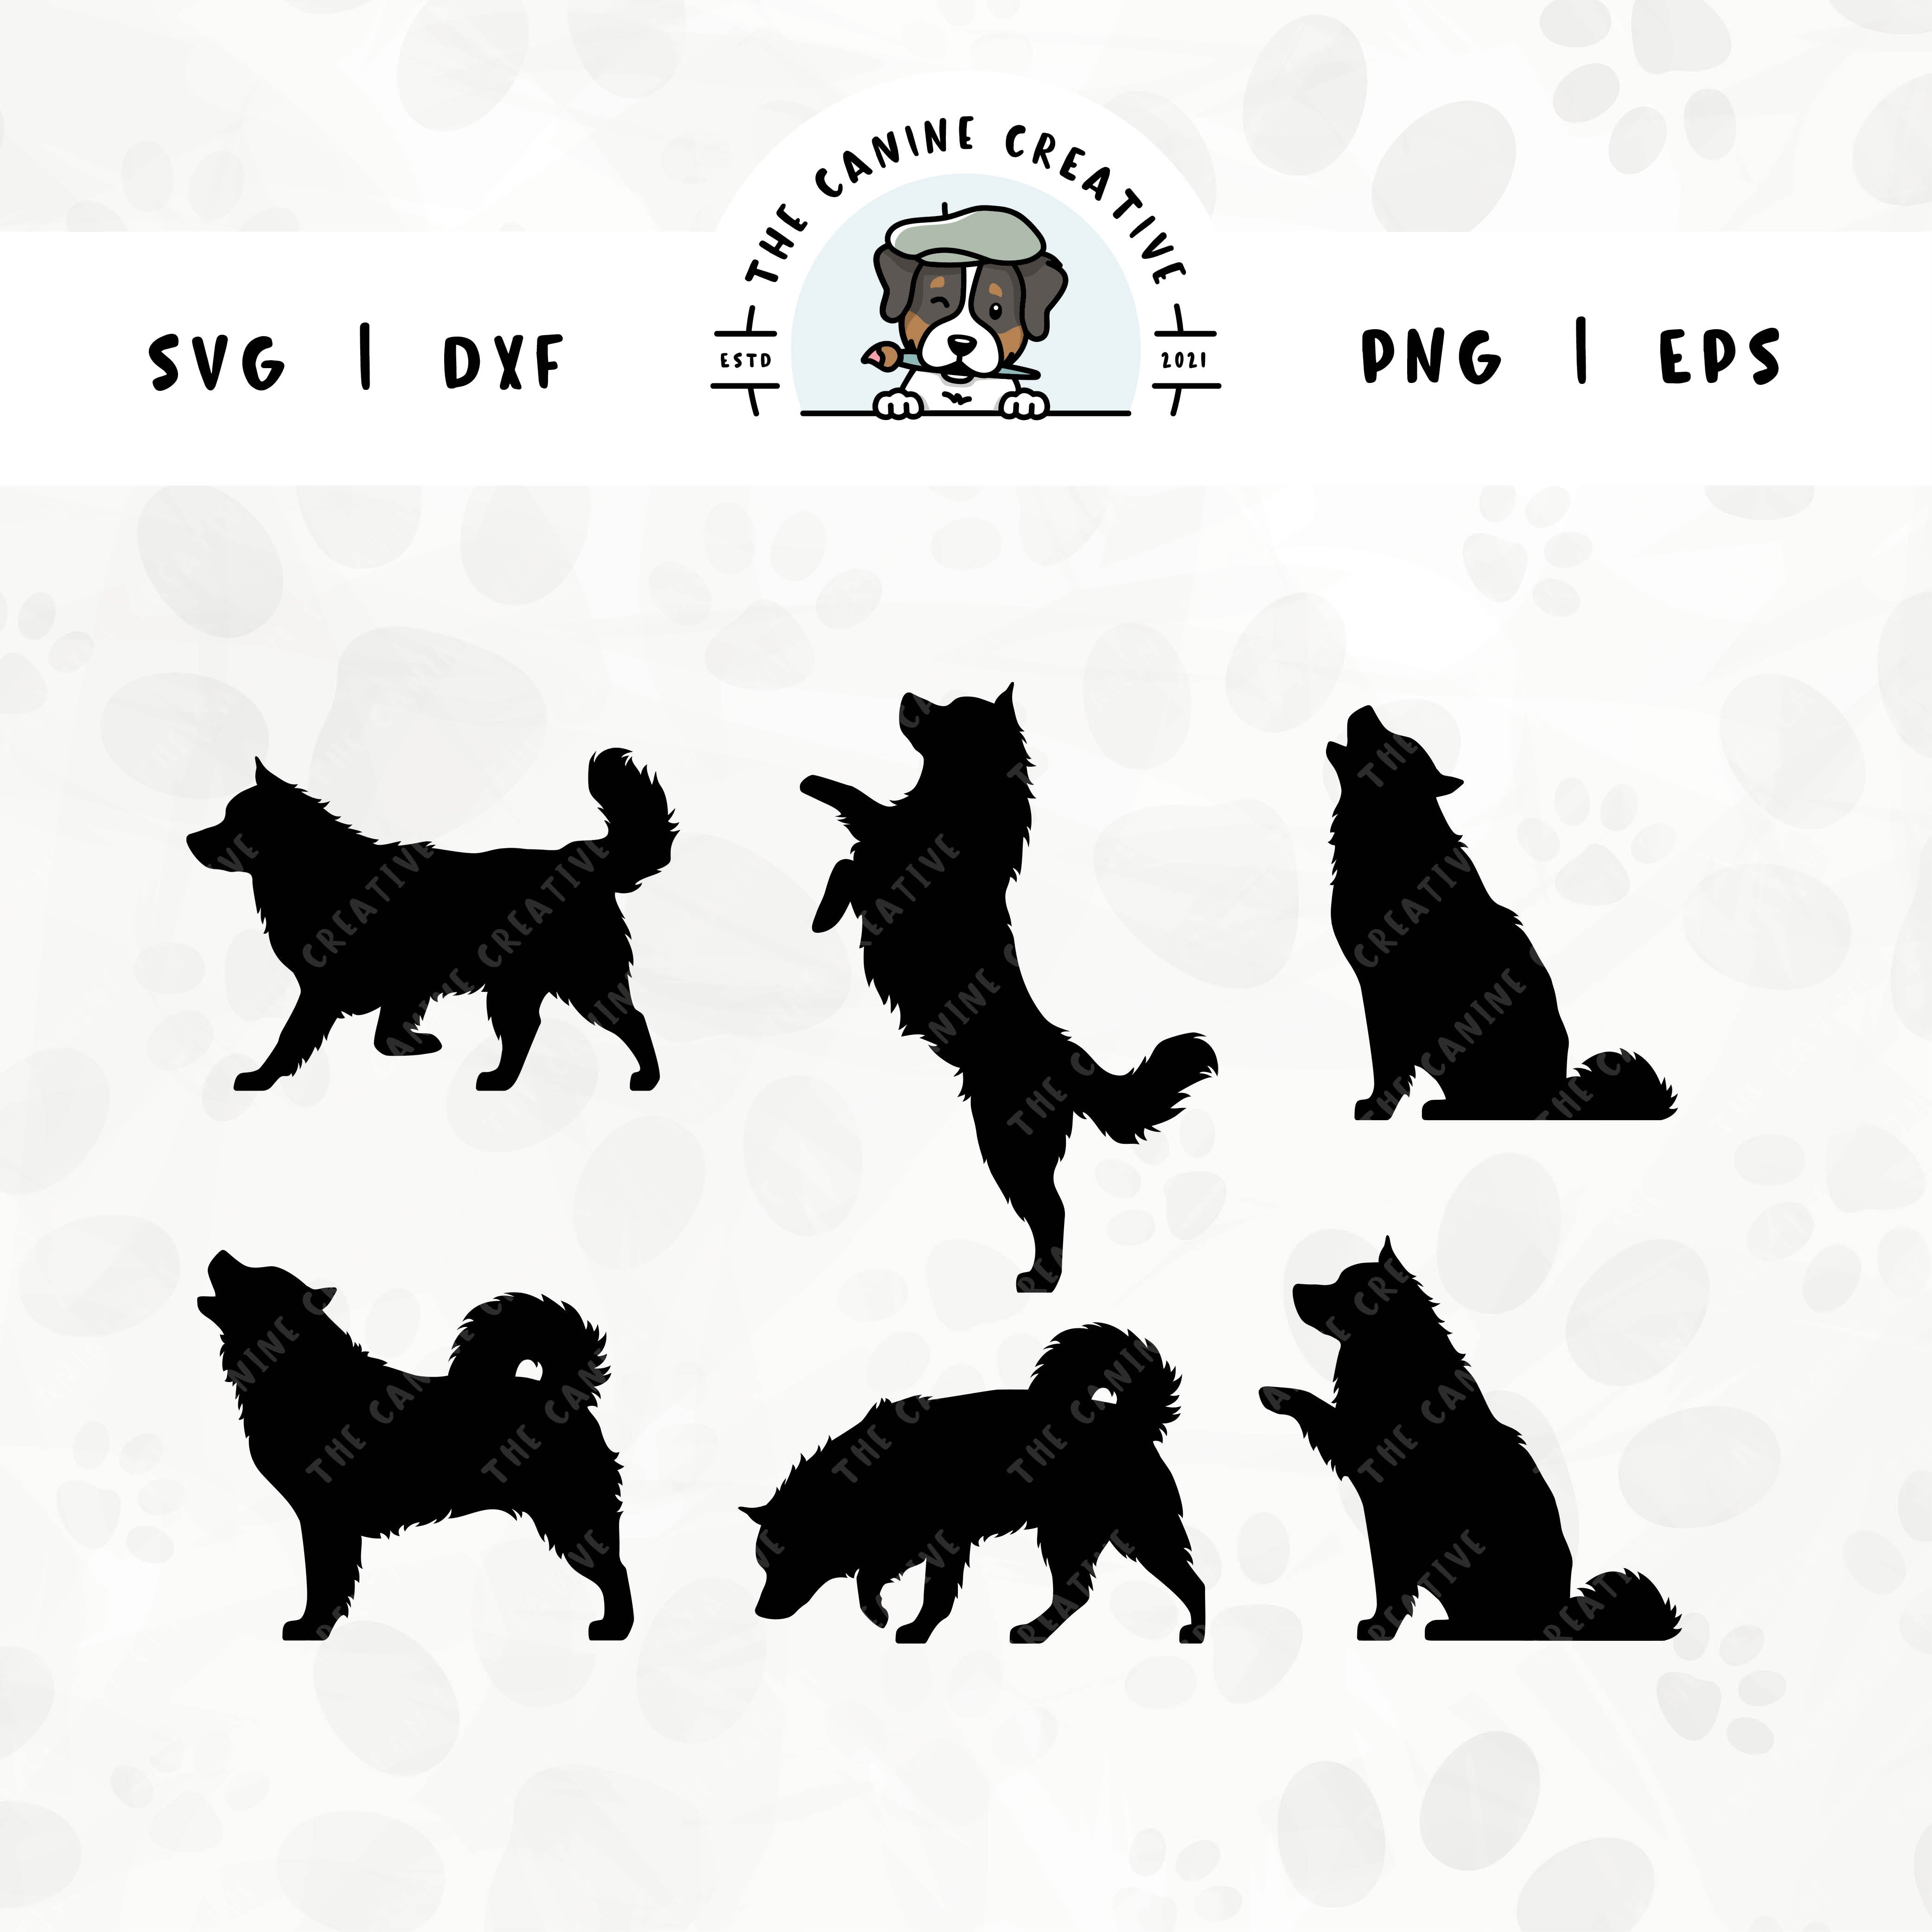 This 6-pack Alaskan Malamute silhouette bundle (set 2) features various dog poses including walking, shaking a paw, jumping up, sniffing, barking, and howling. File formats include: SVG, DXF, PNG, and EPS.